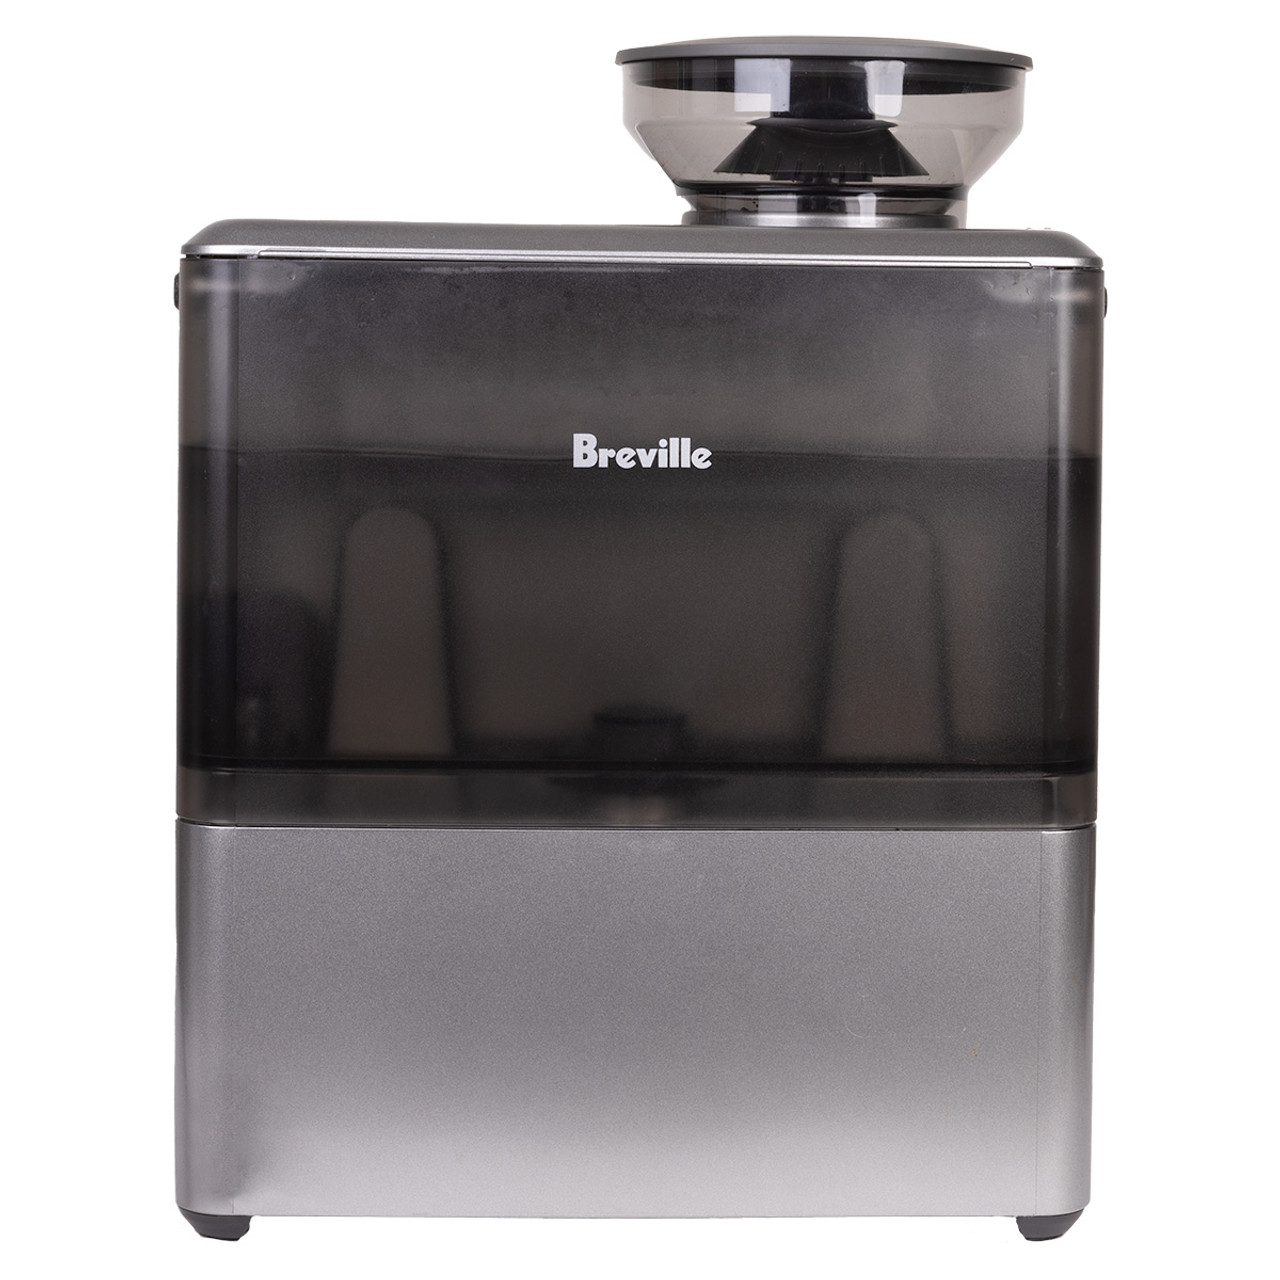 https://cdn11.bigcommerce.com/s-6h7ychjk4/images/stencil/1280x1280/products/11313/95543/Breville-Barista-Touch-WBG-4__73787.1697724108.jpg?c=1&imbypass=on